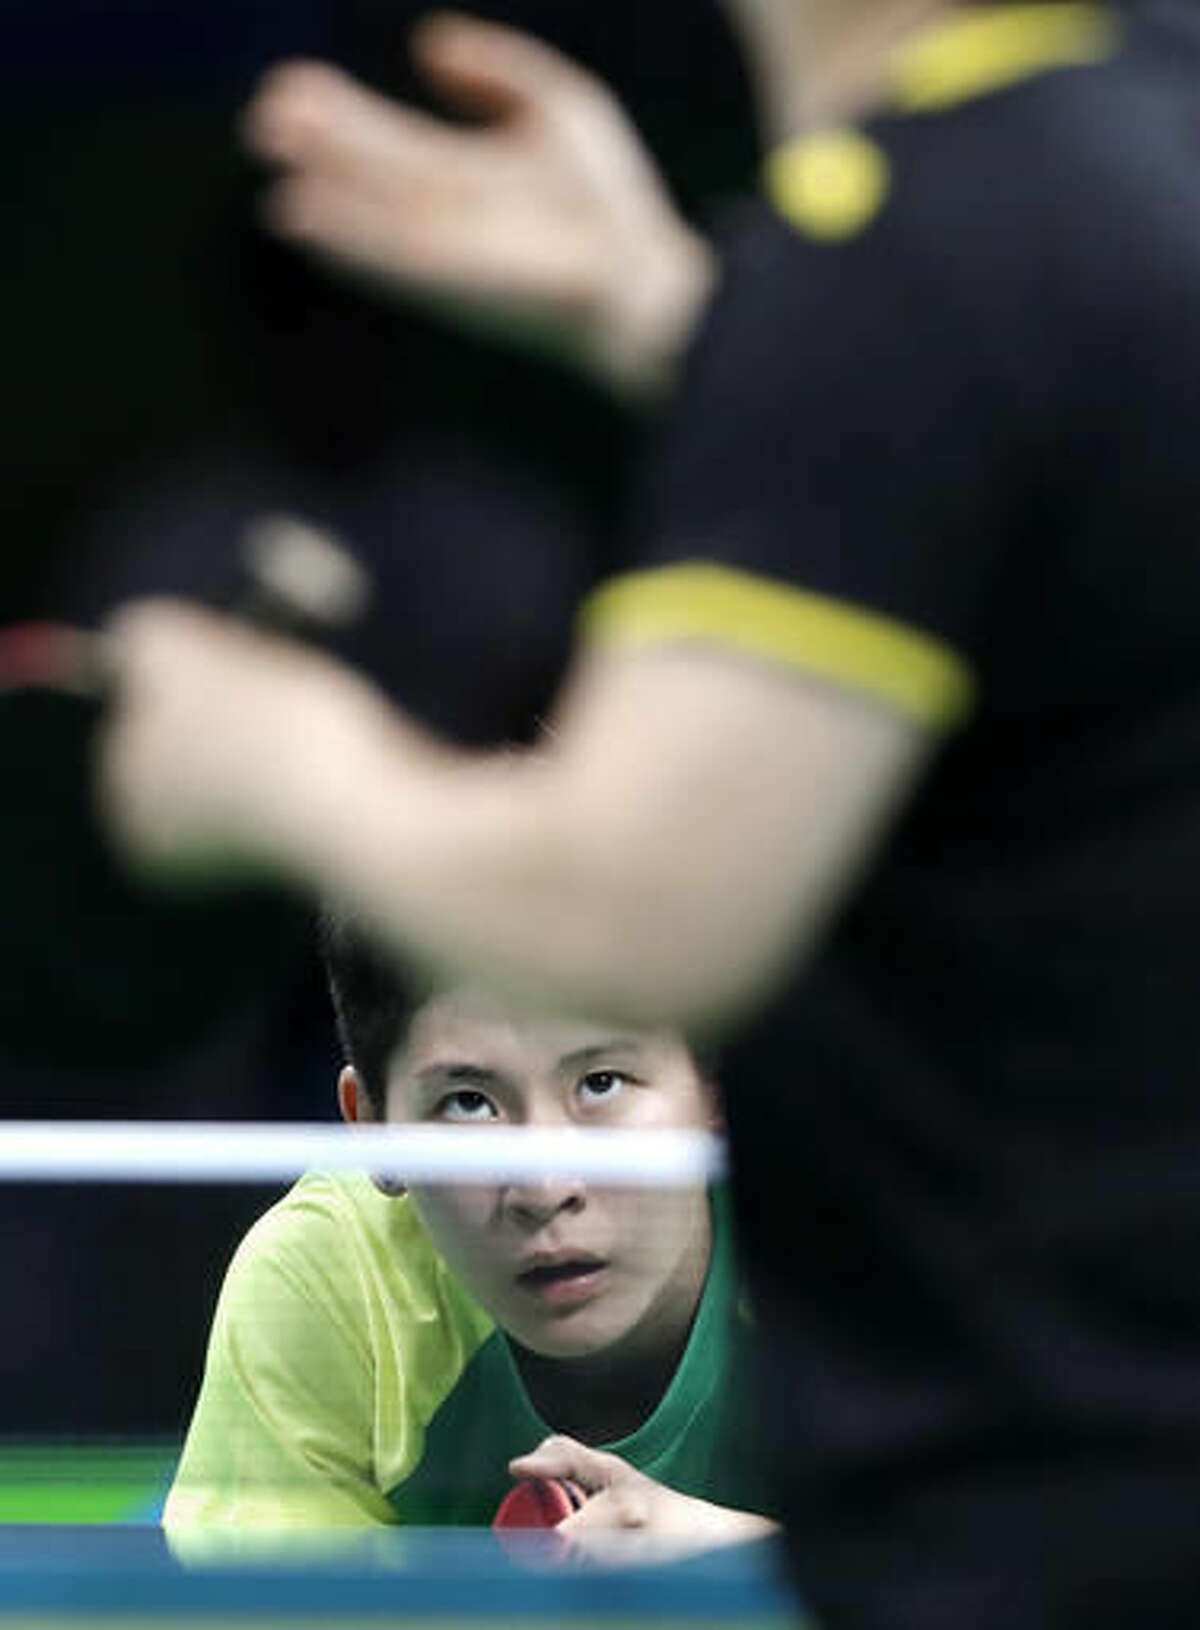 Caroline Kumahara, bottom, of Brazil, waits on the serve of Ni Xia Lian, of Luxembourg, during a table tennis match at the 2016 Summer Olympics in Rio de Janeiro, Brazil, Saturday, Aug. 6, 2016. (AP Photo/Petros Giannakouris)